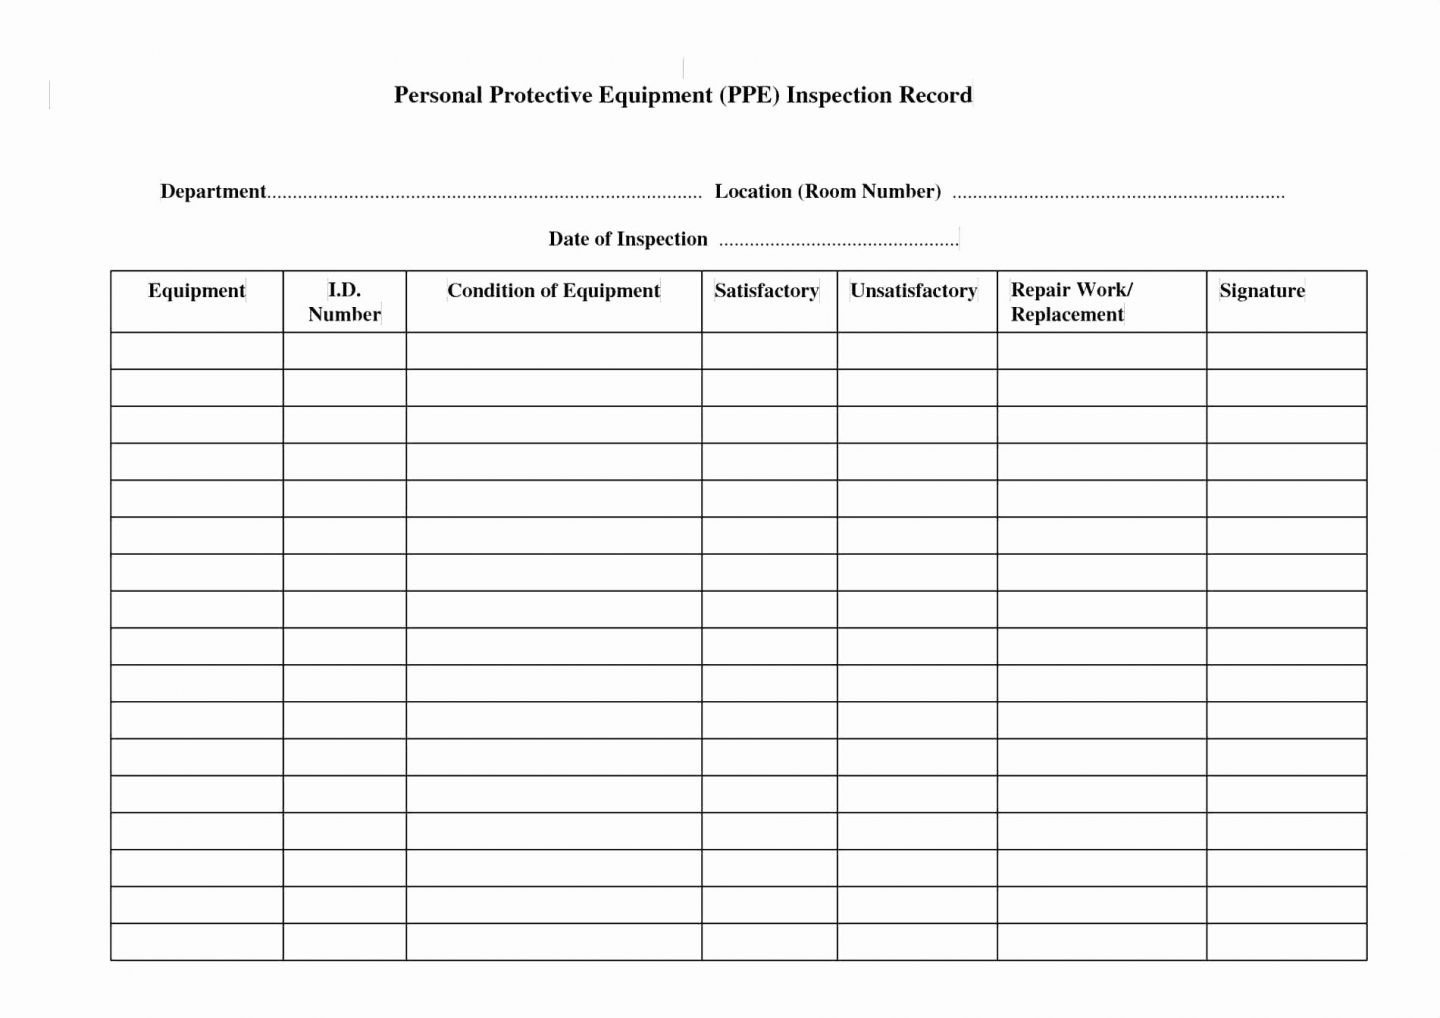 Inspection Log Sheet Easy to Use Inspection Checklist and form Samples Violeet